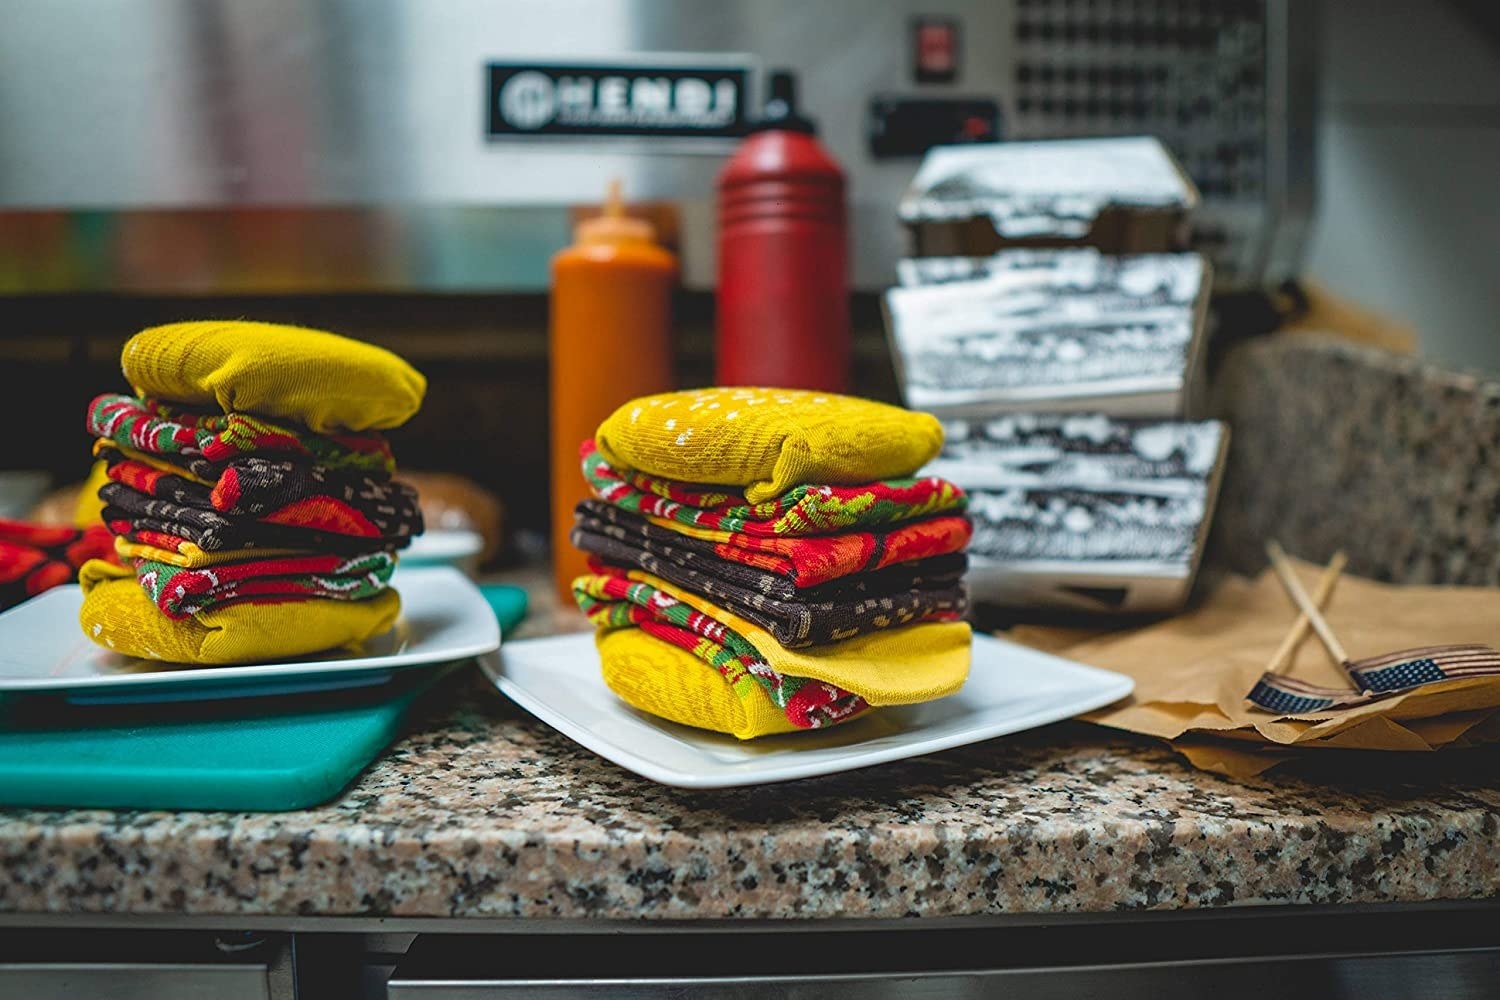 The burger socks made to look like a burger with yellow, green, red and brown fabric colors